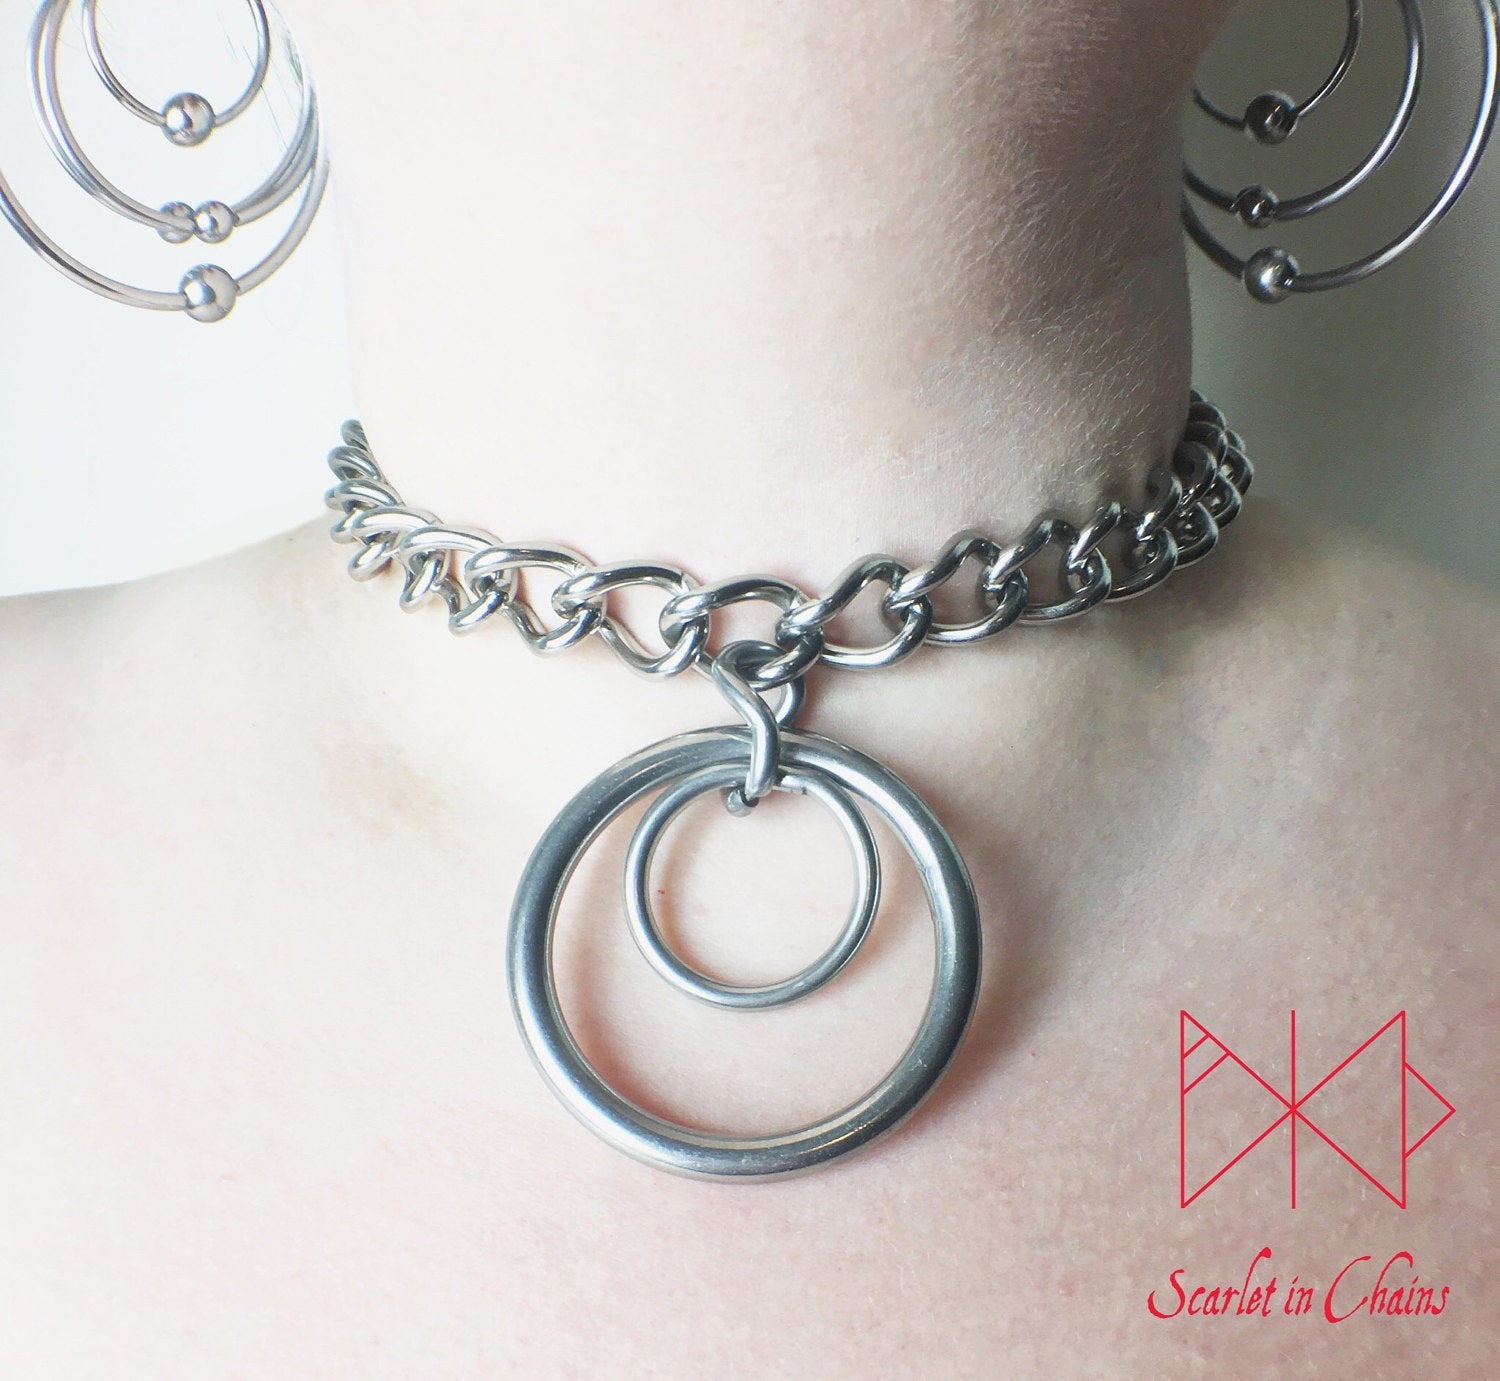 Eclipse Collar worn, 3mm chain collar with large 40mm O ring with a 20mm smaller O ring inside it 